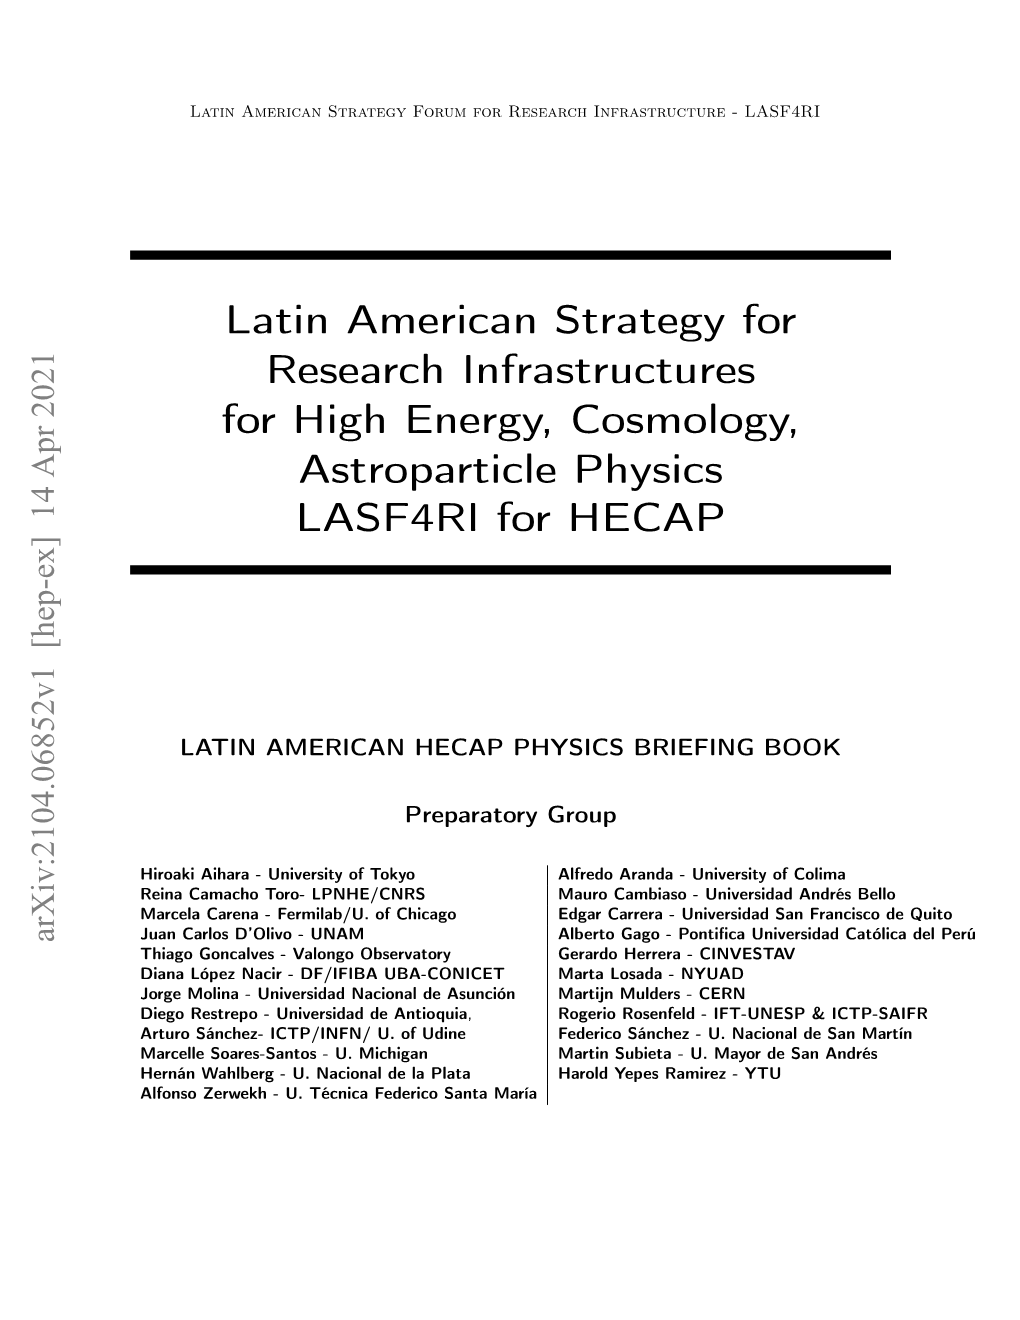 Latin American Strategy for Research Infrastructures for High Energy, Cosmology, Astroparticle Physics LASF4RI for HECAP